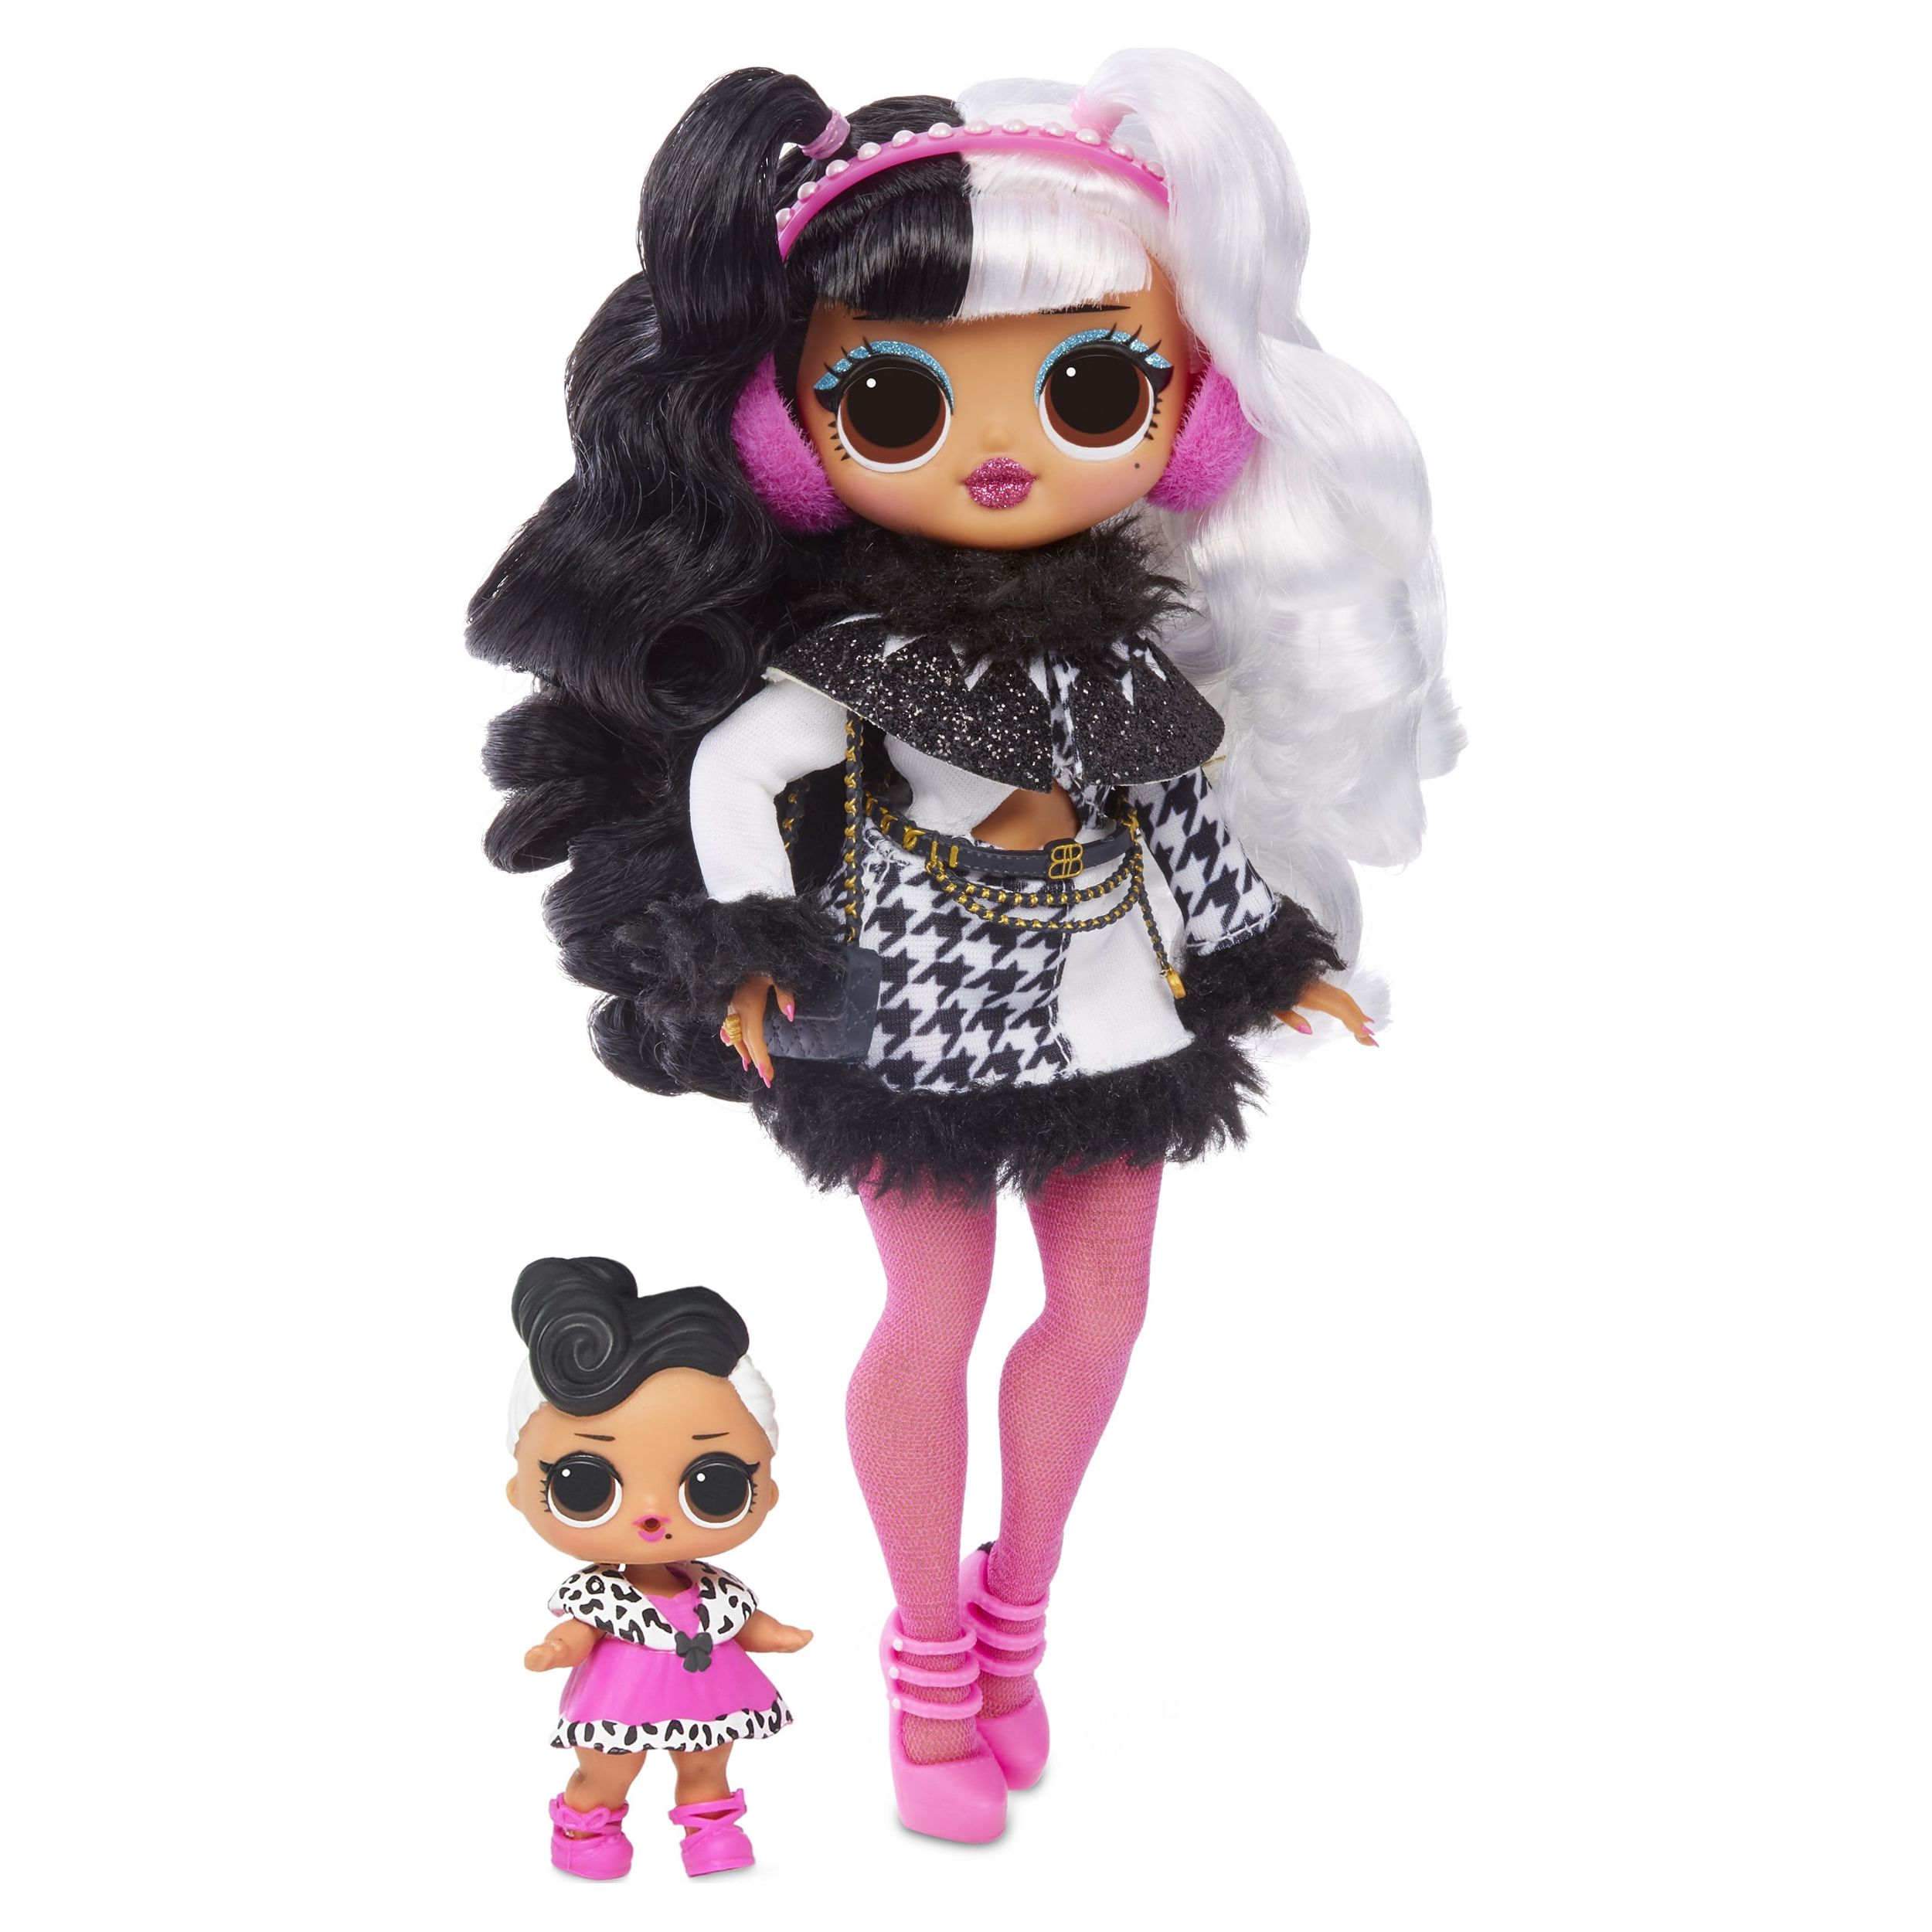 LOL Surprise OMG Winter Disco Dollie Fashion Doll & Sister, Great Gift for Kids Ages 4 5 6+ - image 1 of 3